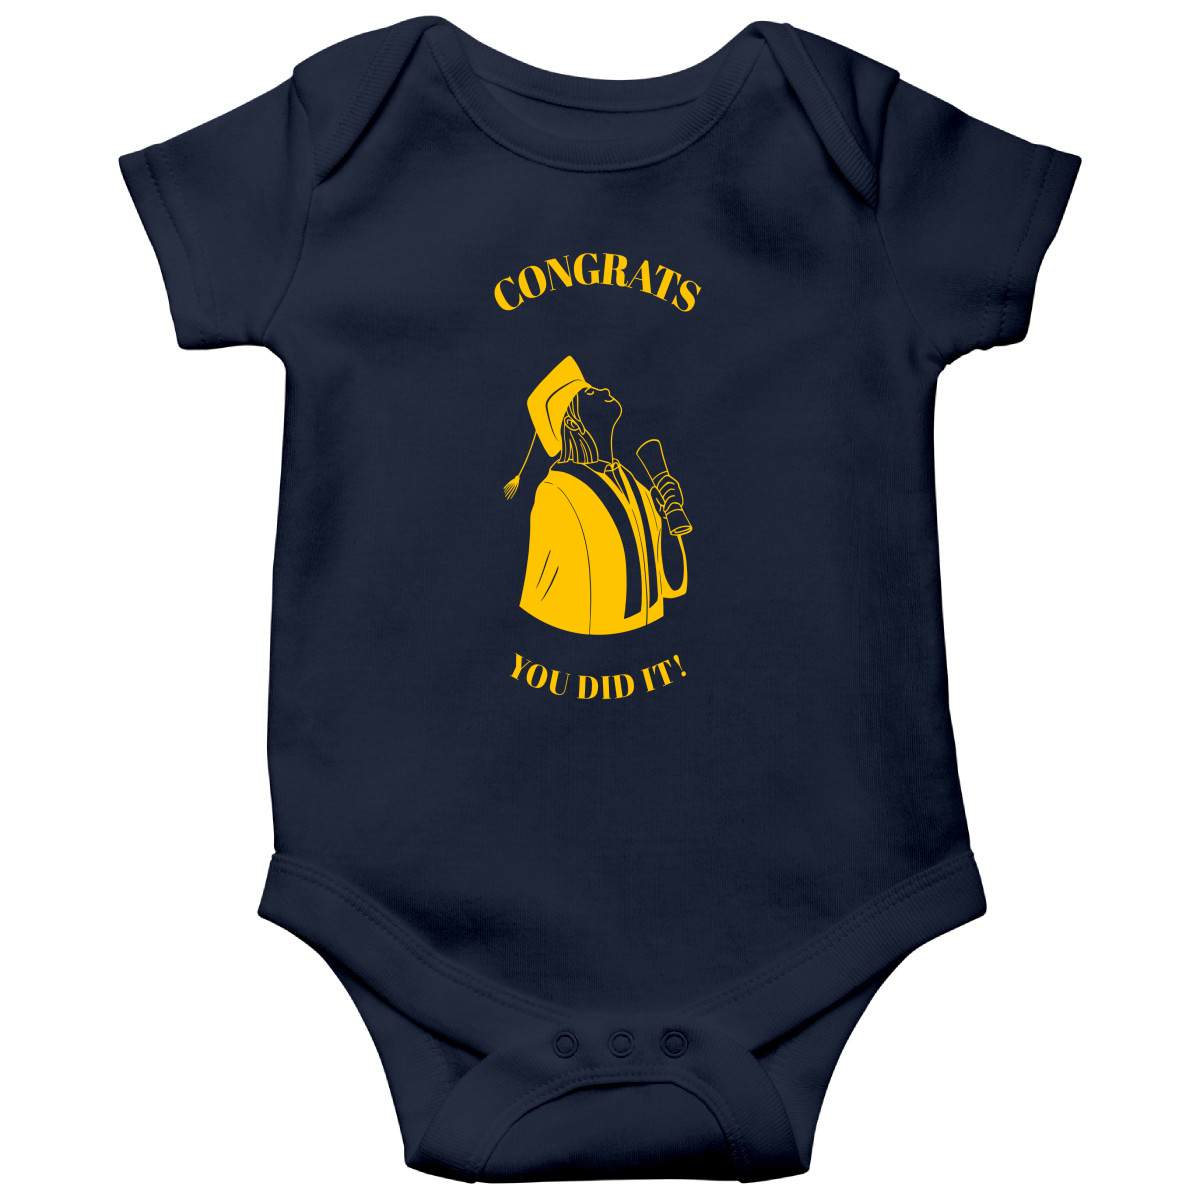 Congrats You Did It! Baby Bodysuits